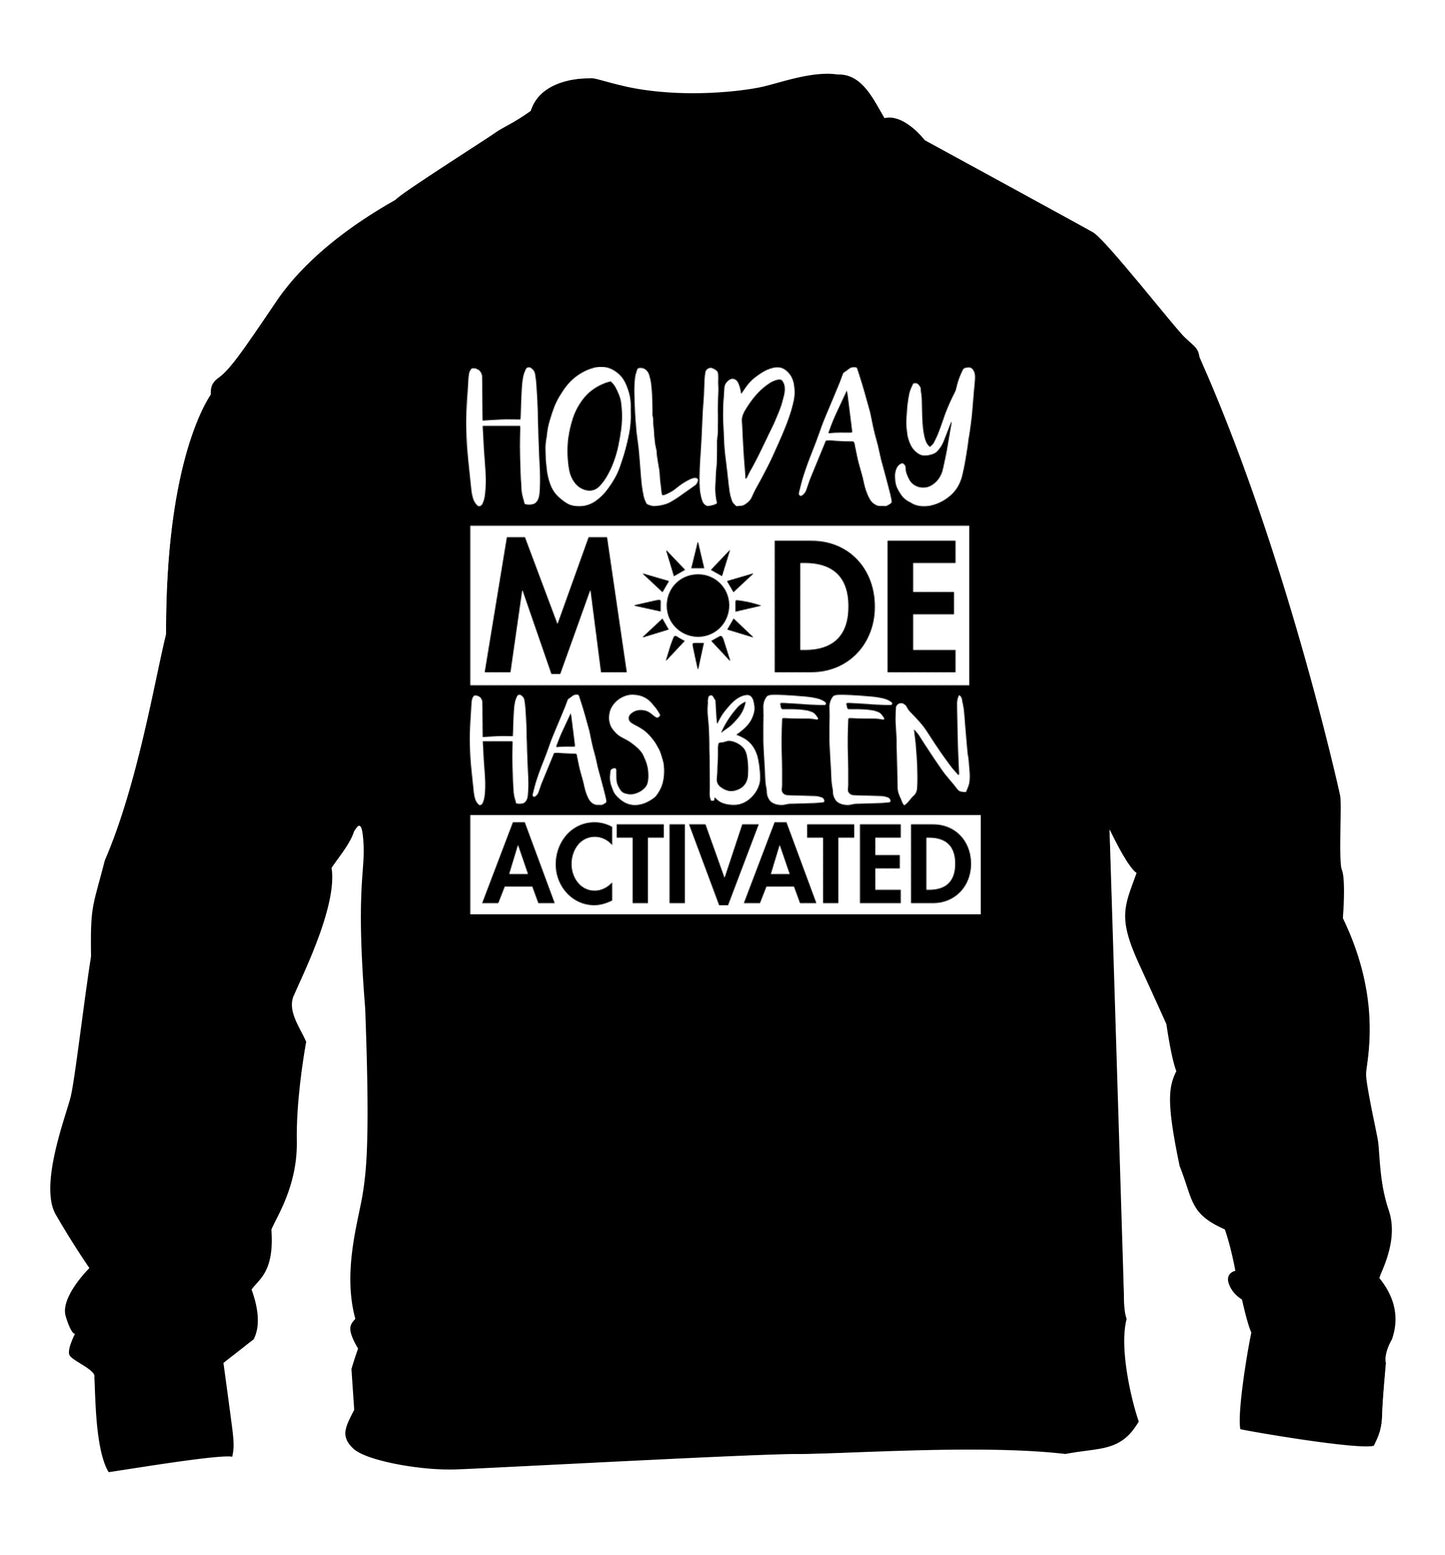 Holiday mode has been activated children's black sweater 12-14 Years